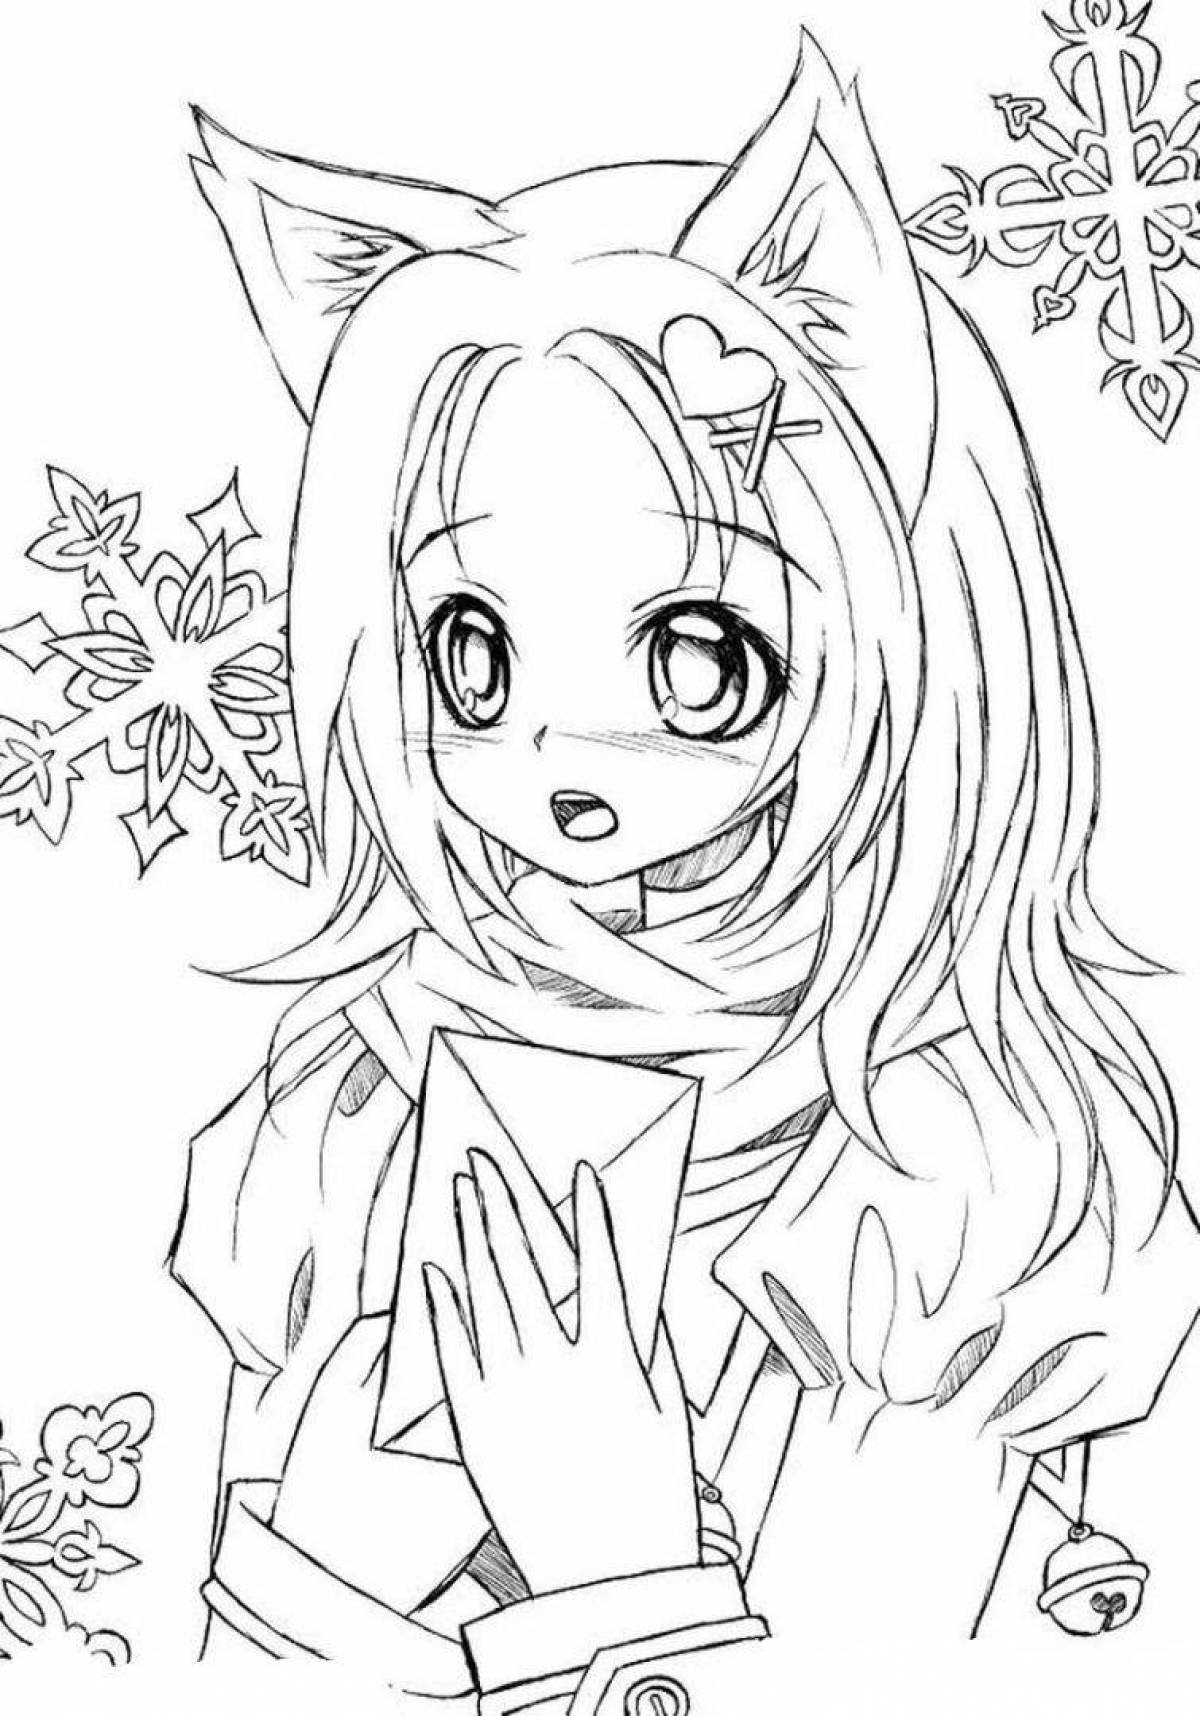 Adorable anime coloring book for kids